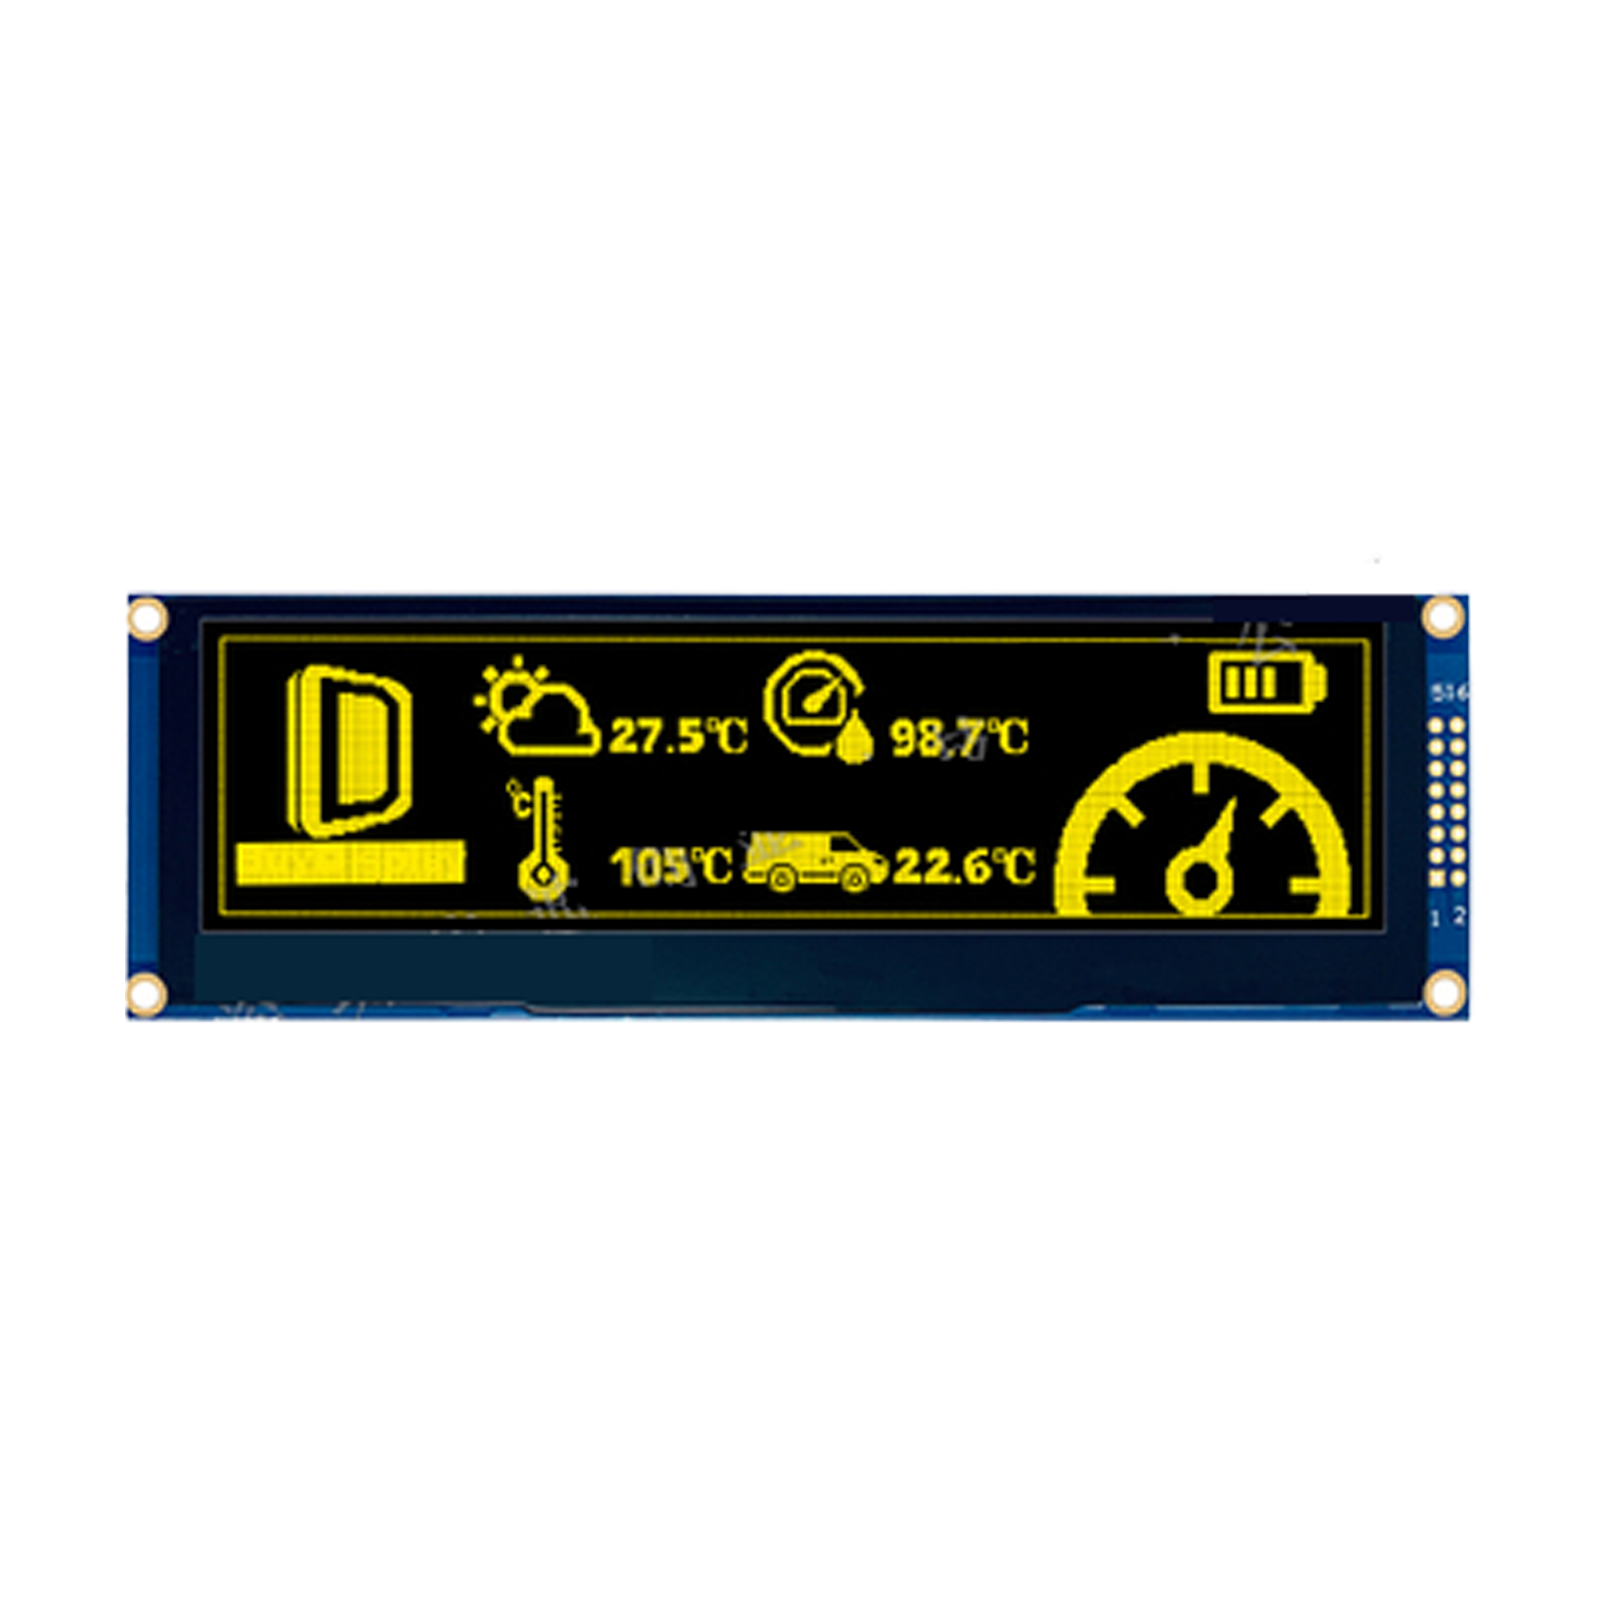 5.5-inch yellow OLED graphic display module with 256x64 resolution, connected via SPI